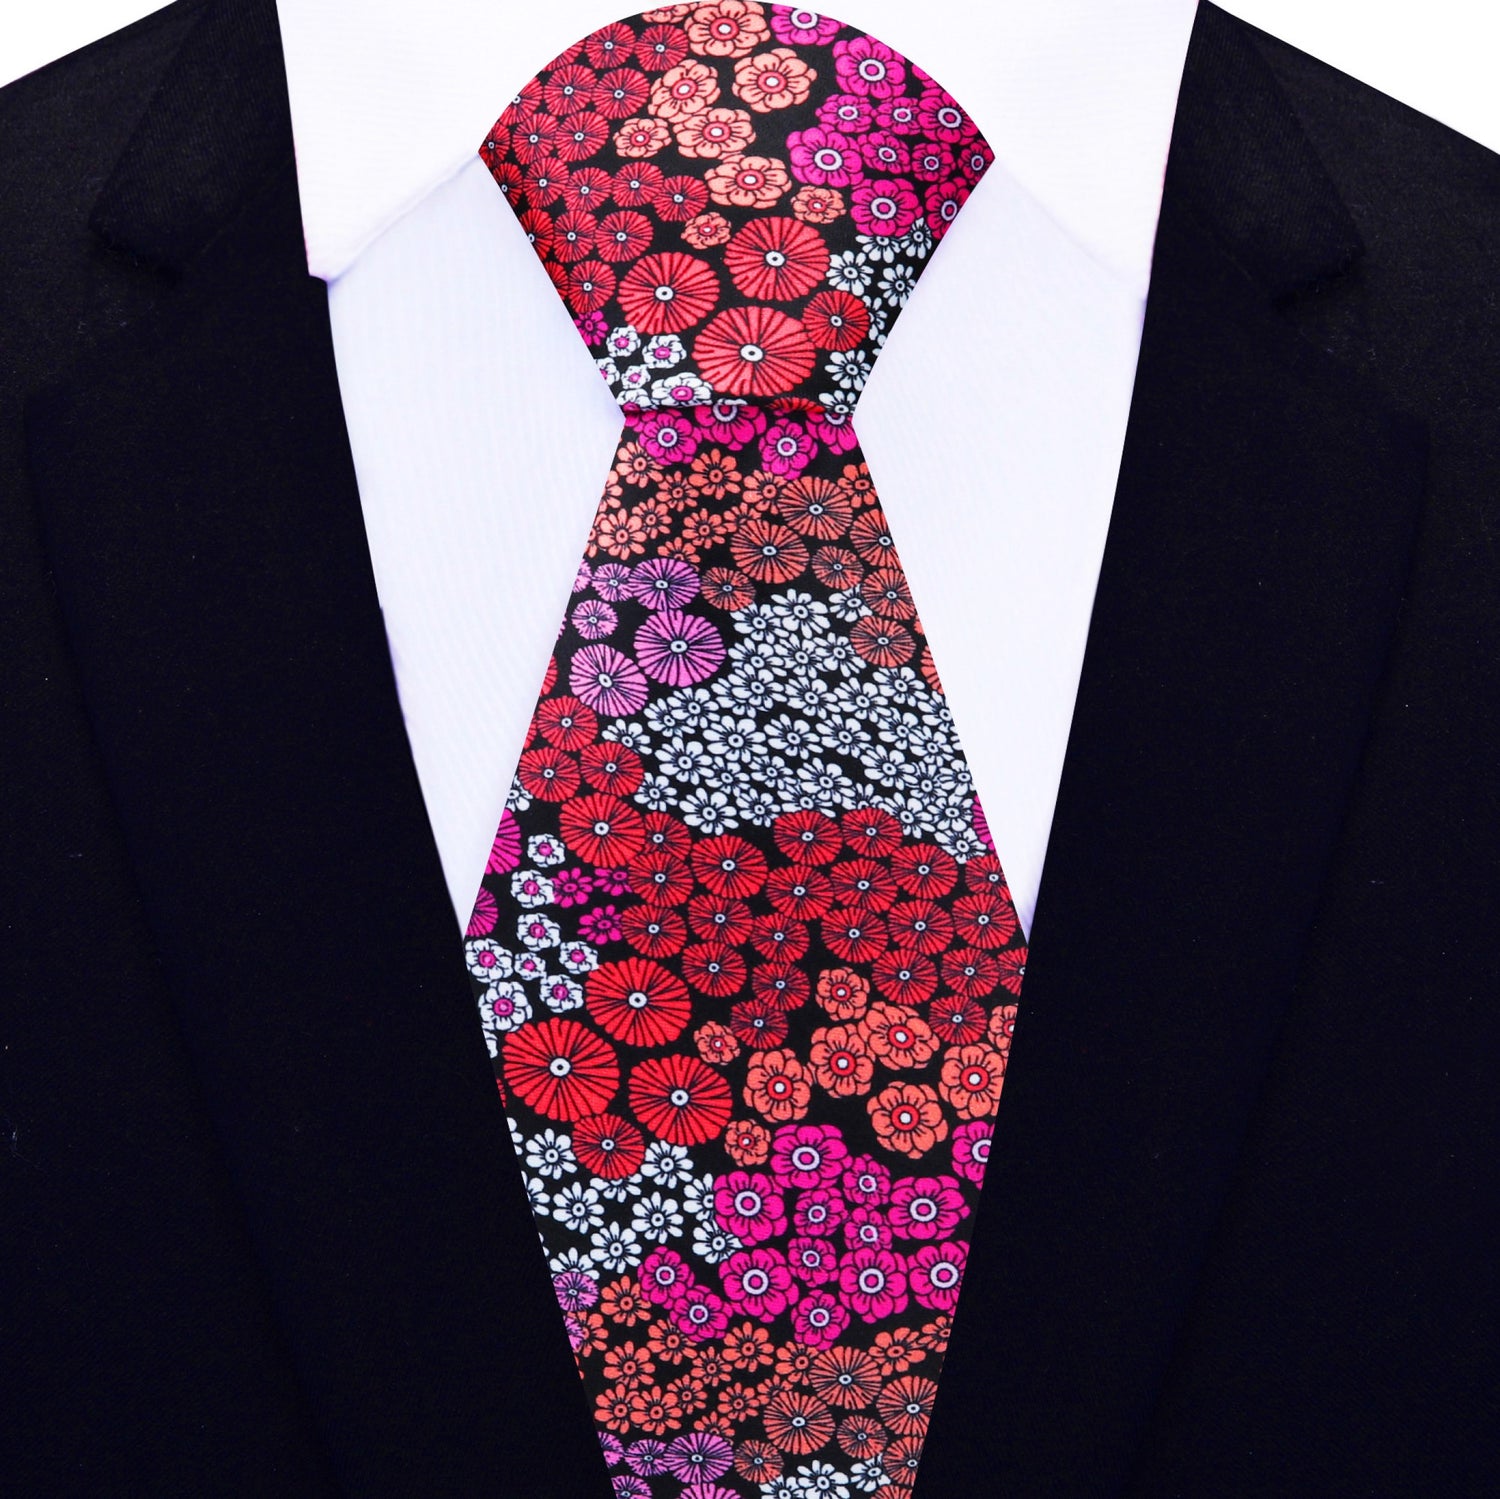 View 2: Red Pink Orange and White Mixed Flowers Tie